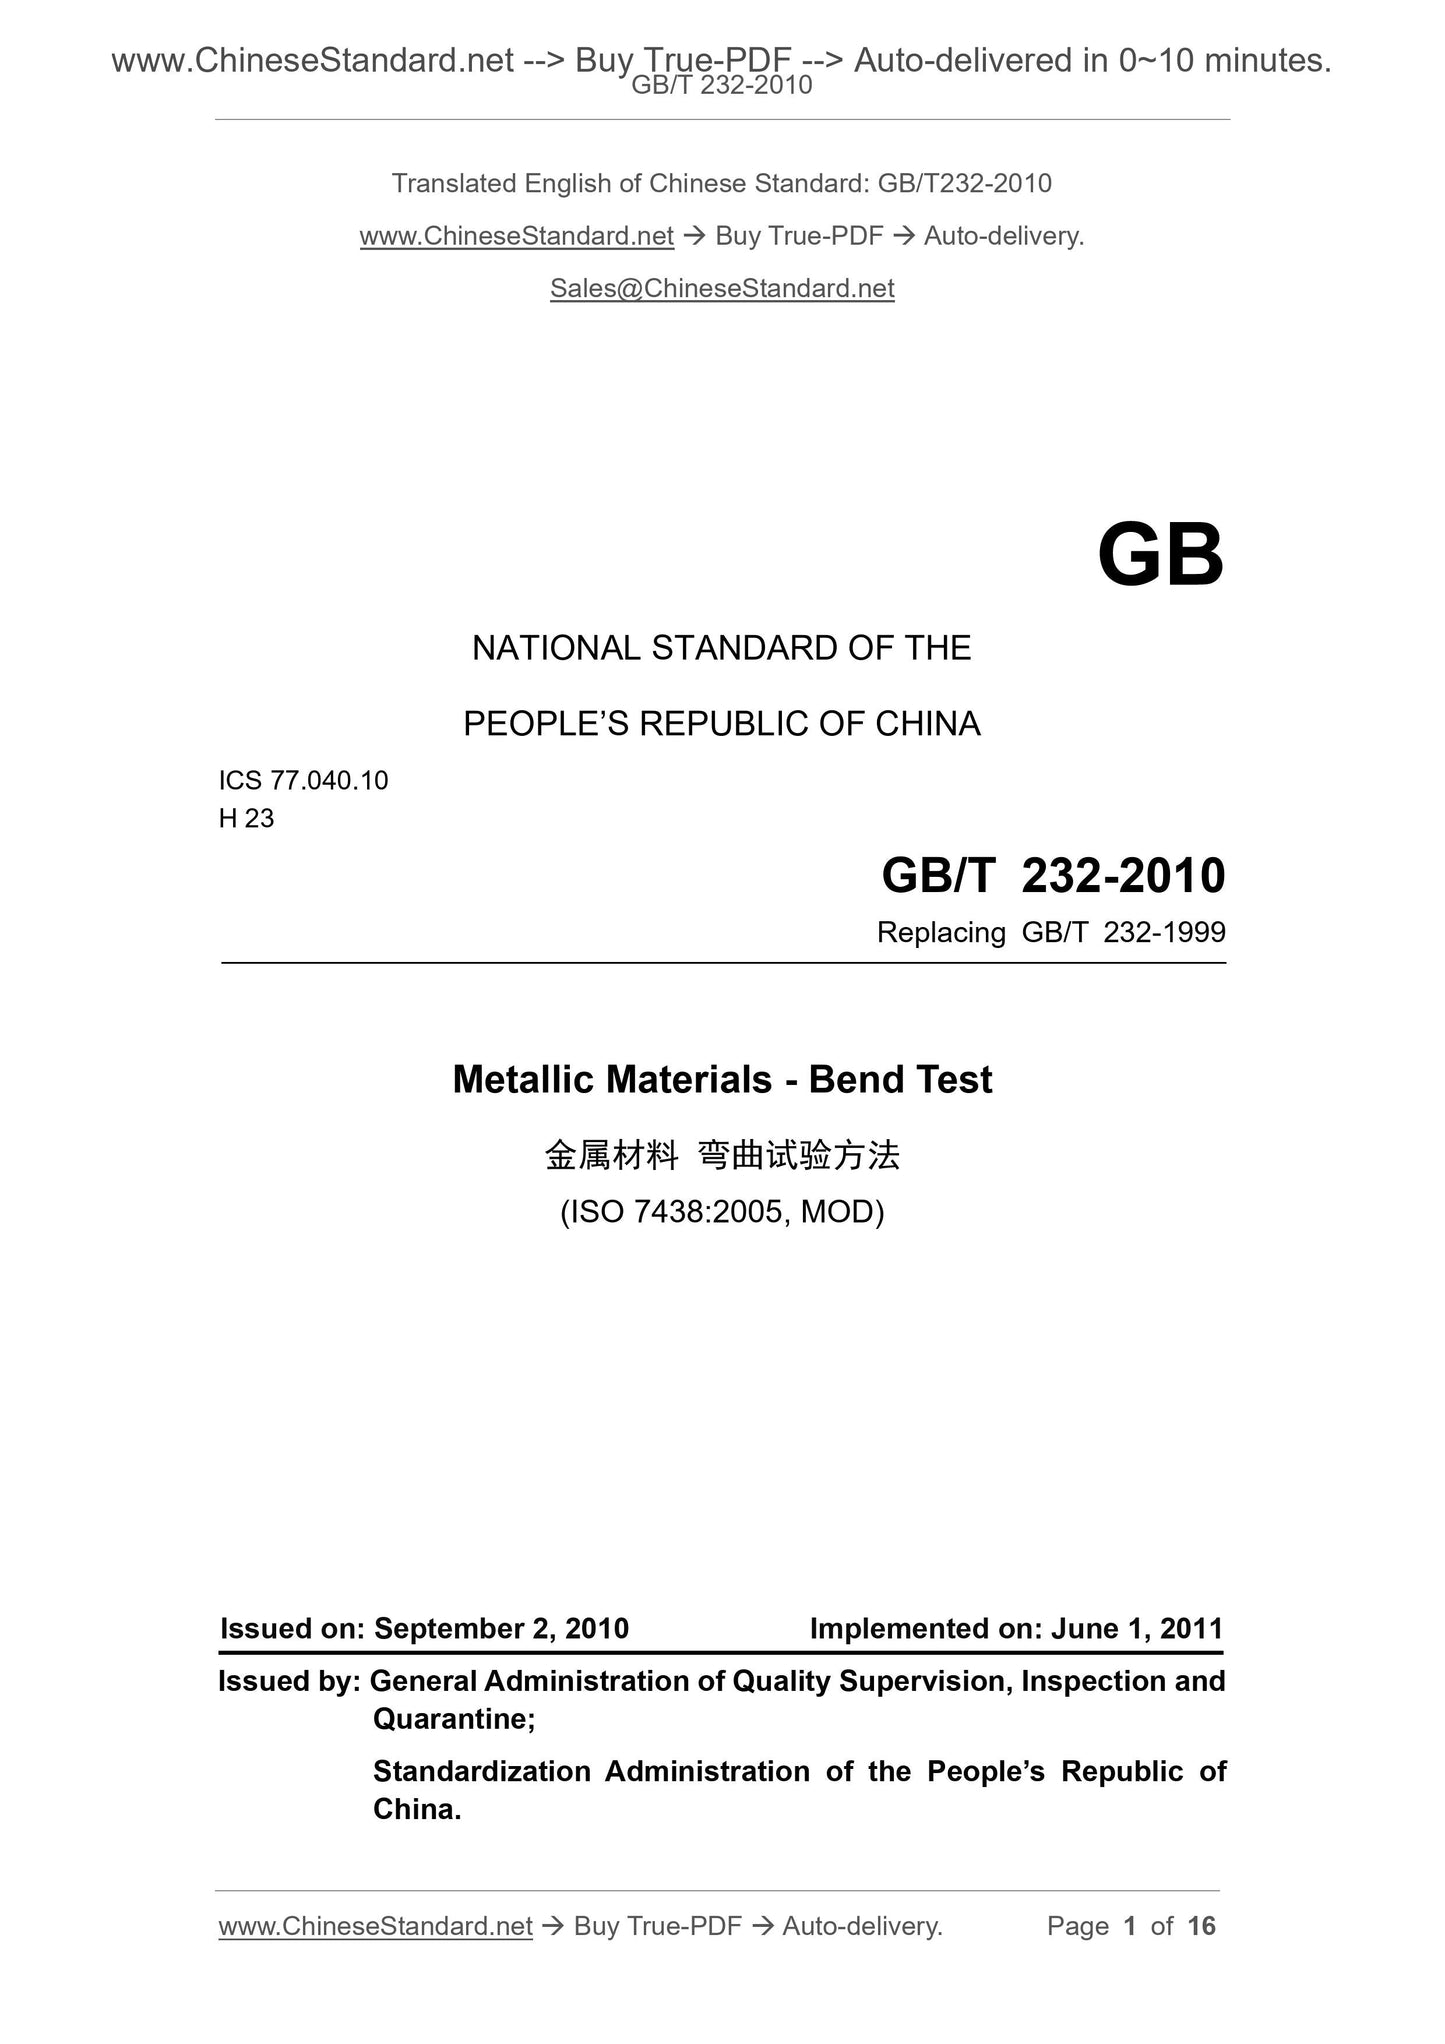 GB/T 232-2010 Page 1